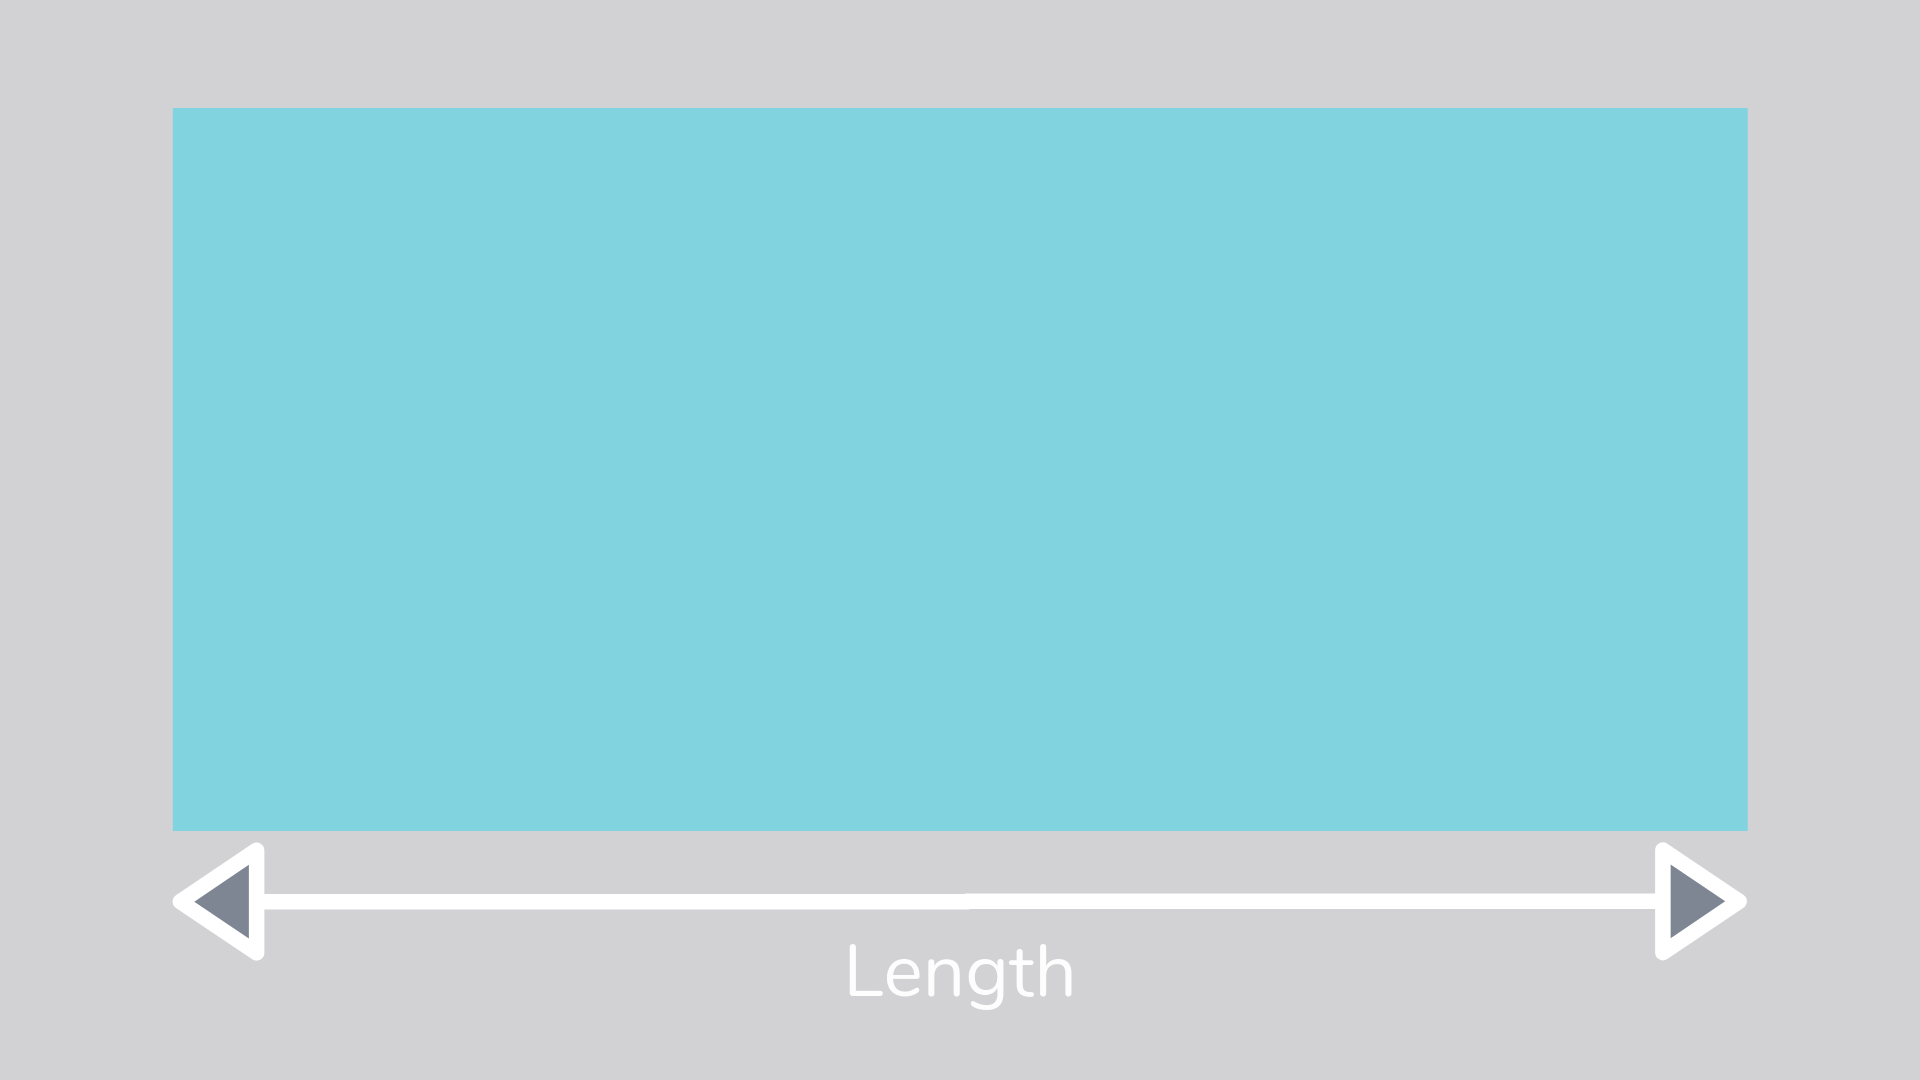 length of rectangle